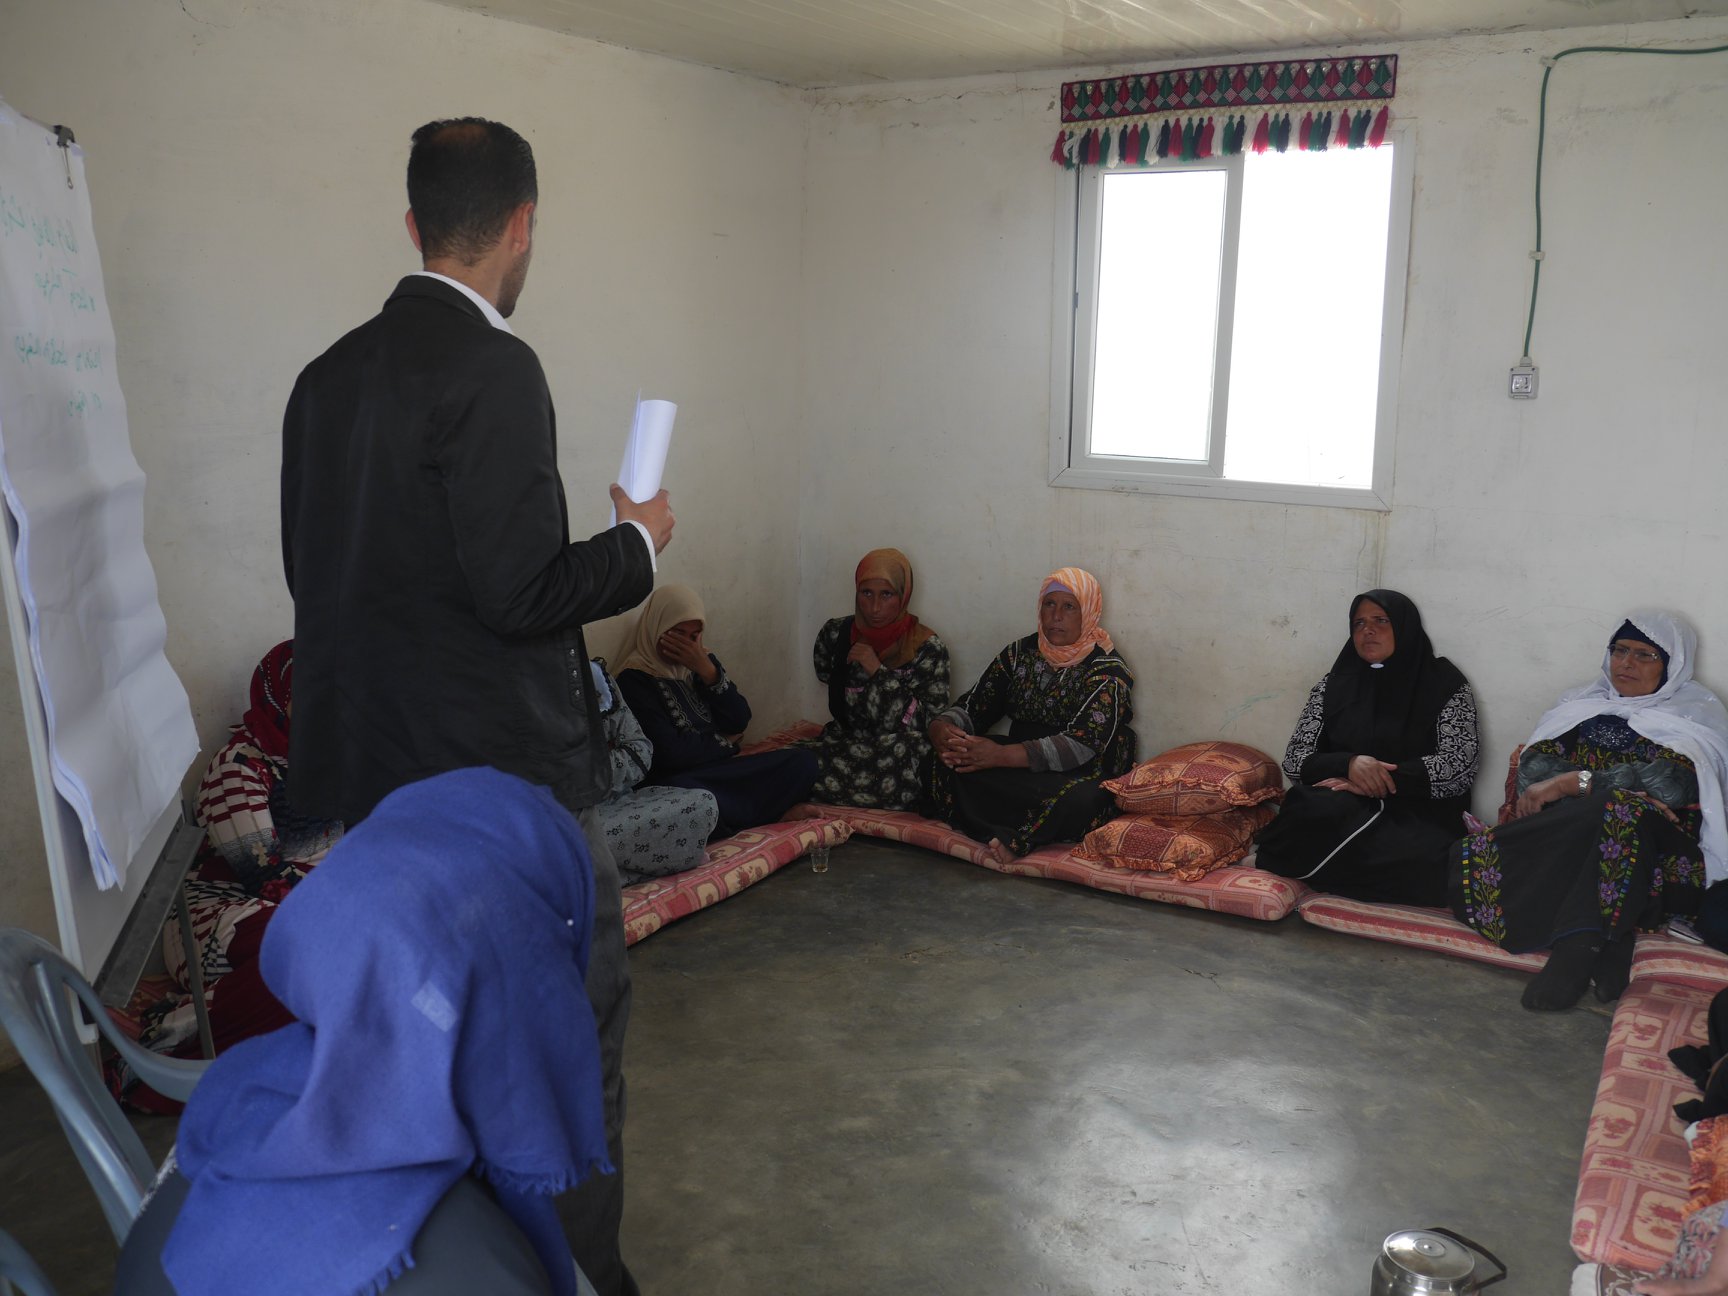  Roles for Social Change Association- ADWAR continues to hold mobile legal visits under the “Protecting women’s legal rights” social project that aims to reduce gender-violence based, in Mafasr Yatta.